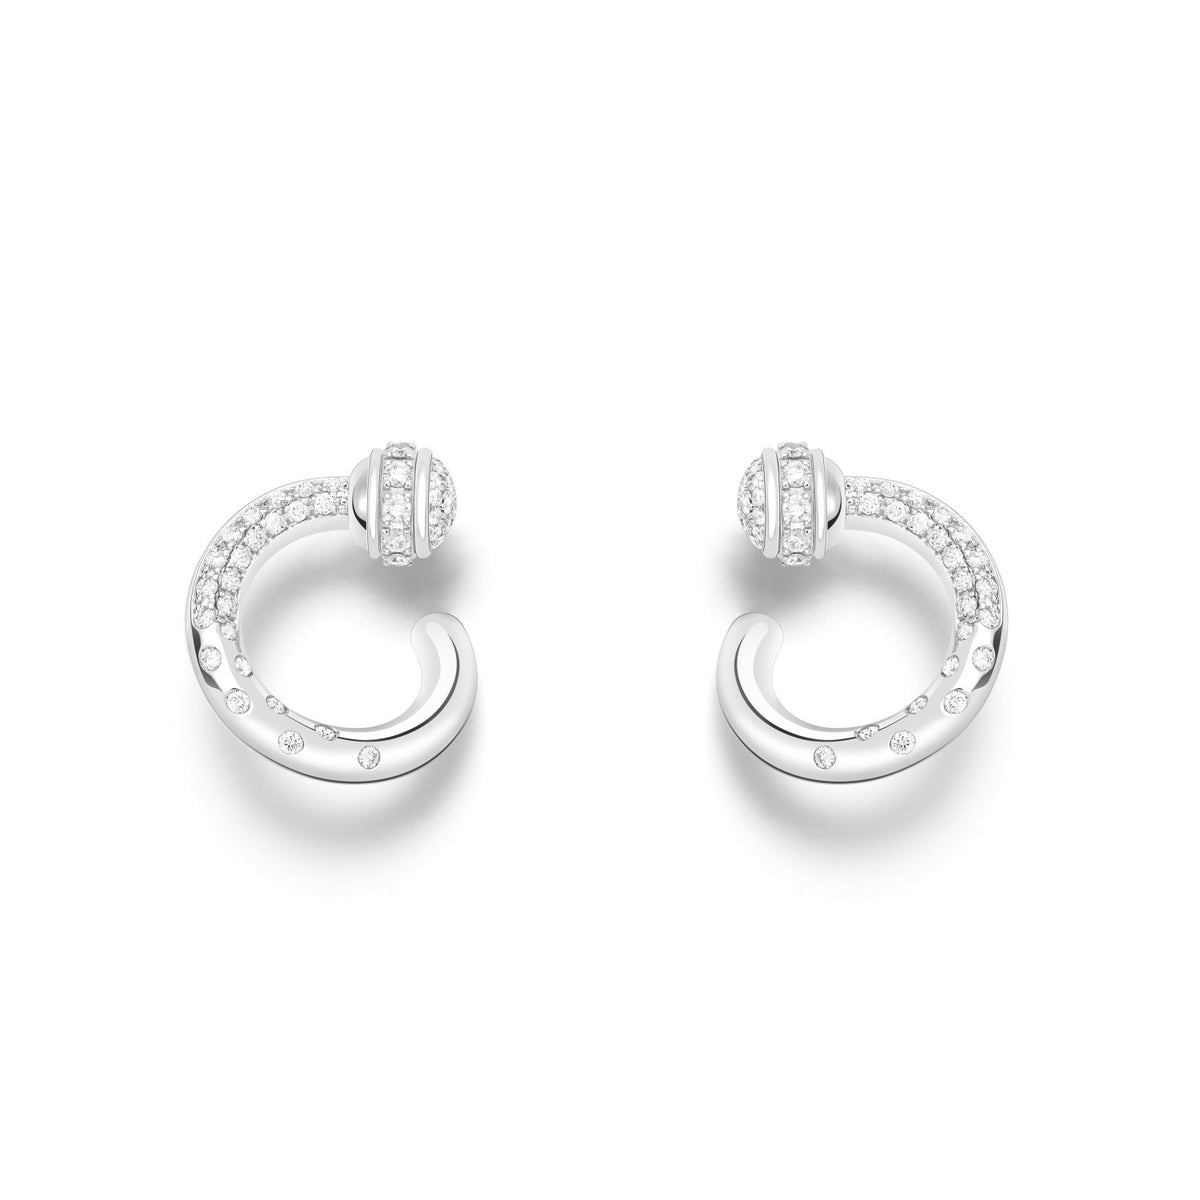 Possession open hoop earrings in 18K white gold set with 104 brilliant-cut diamonds (approx. 0.57 ct).